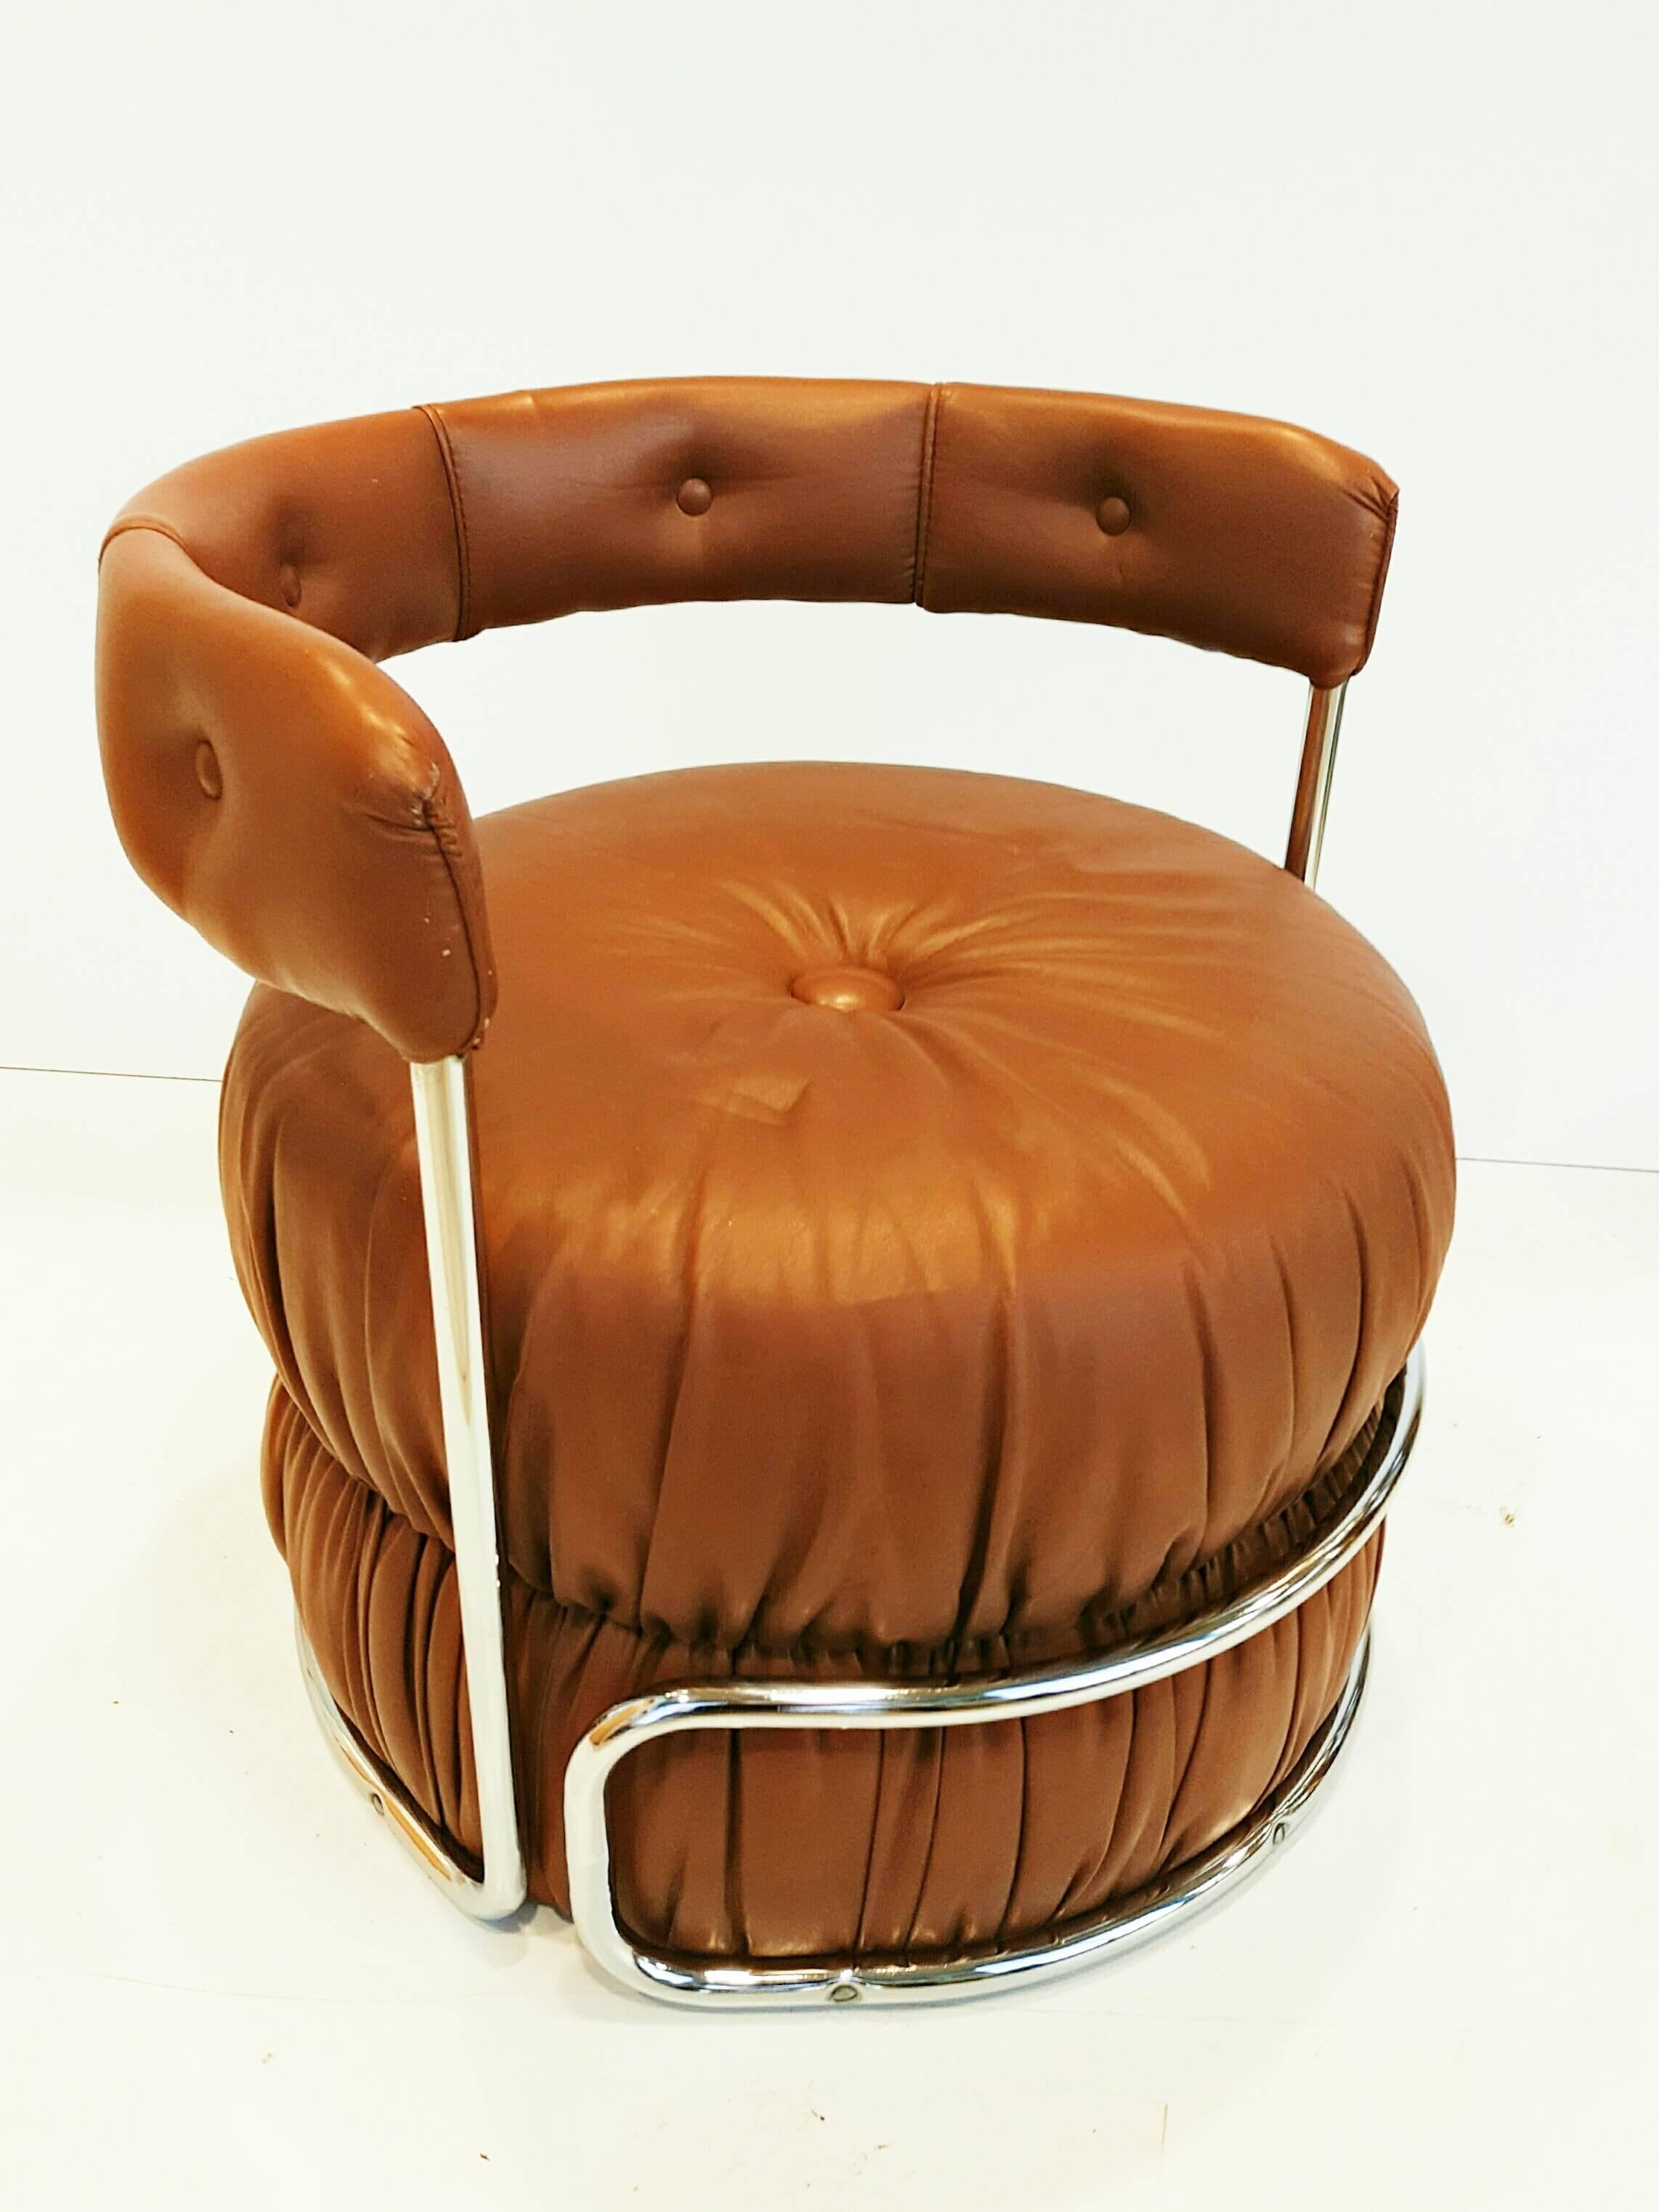 Beautiful French pouf chairs manufactured in France in 1970s, tan leatherette and chrome in perfect vintage condition.